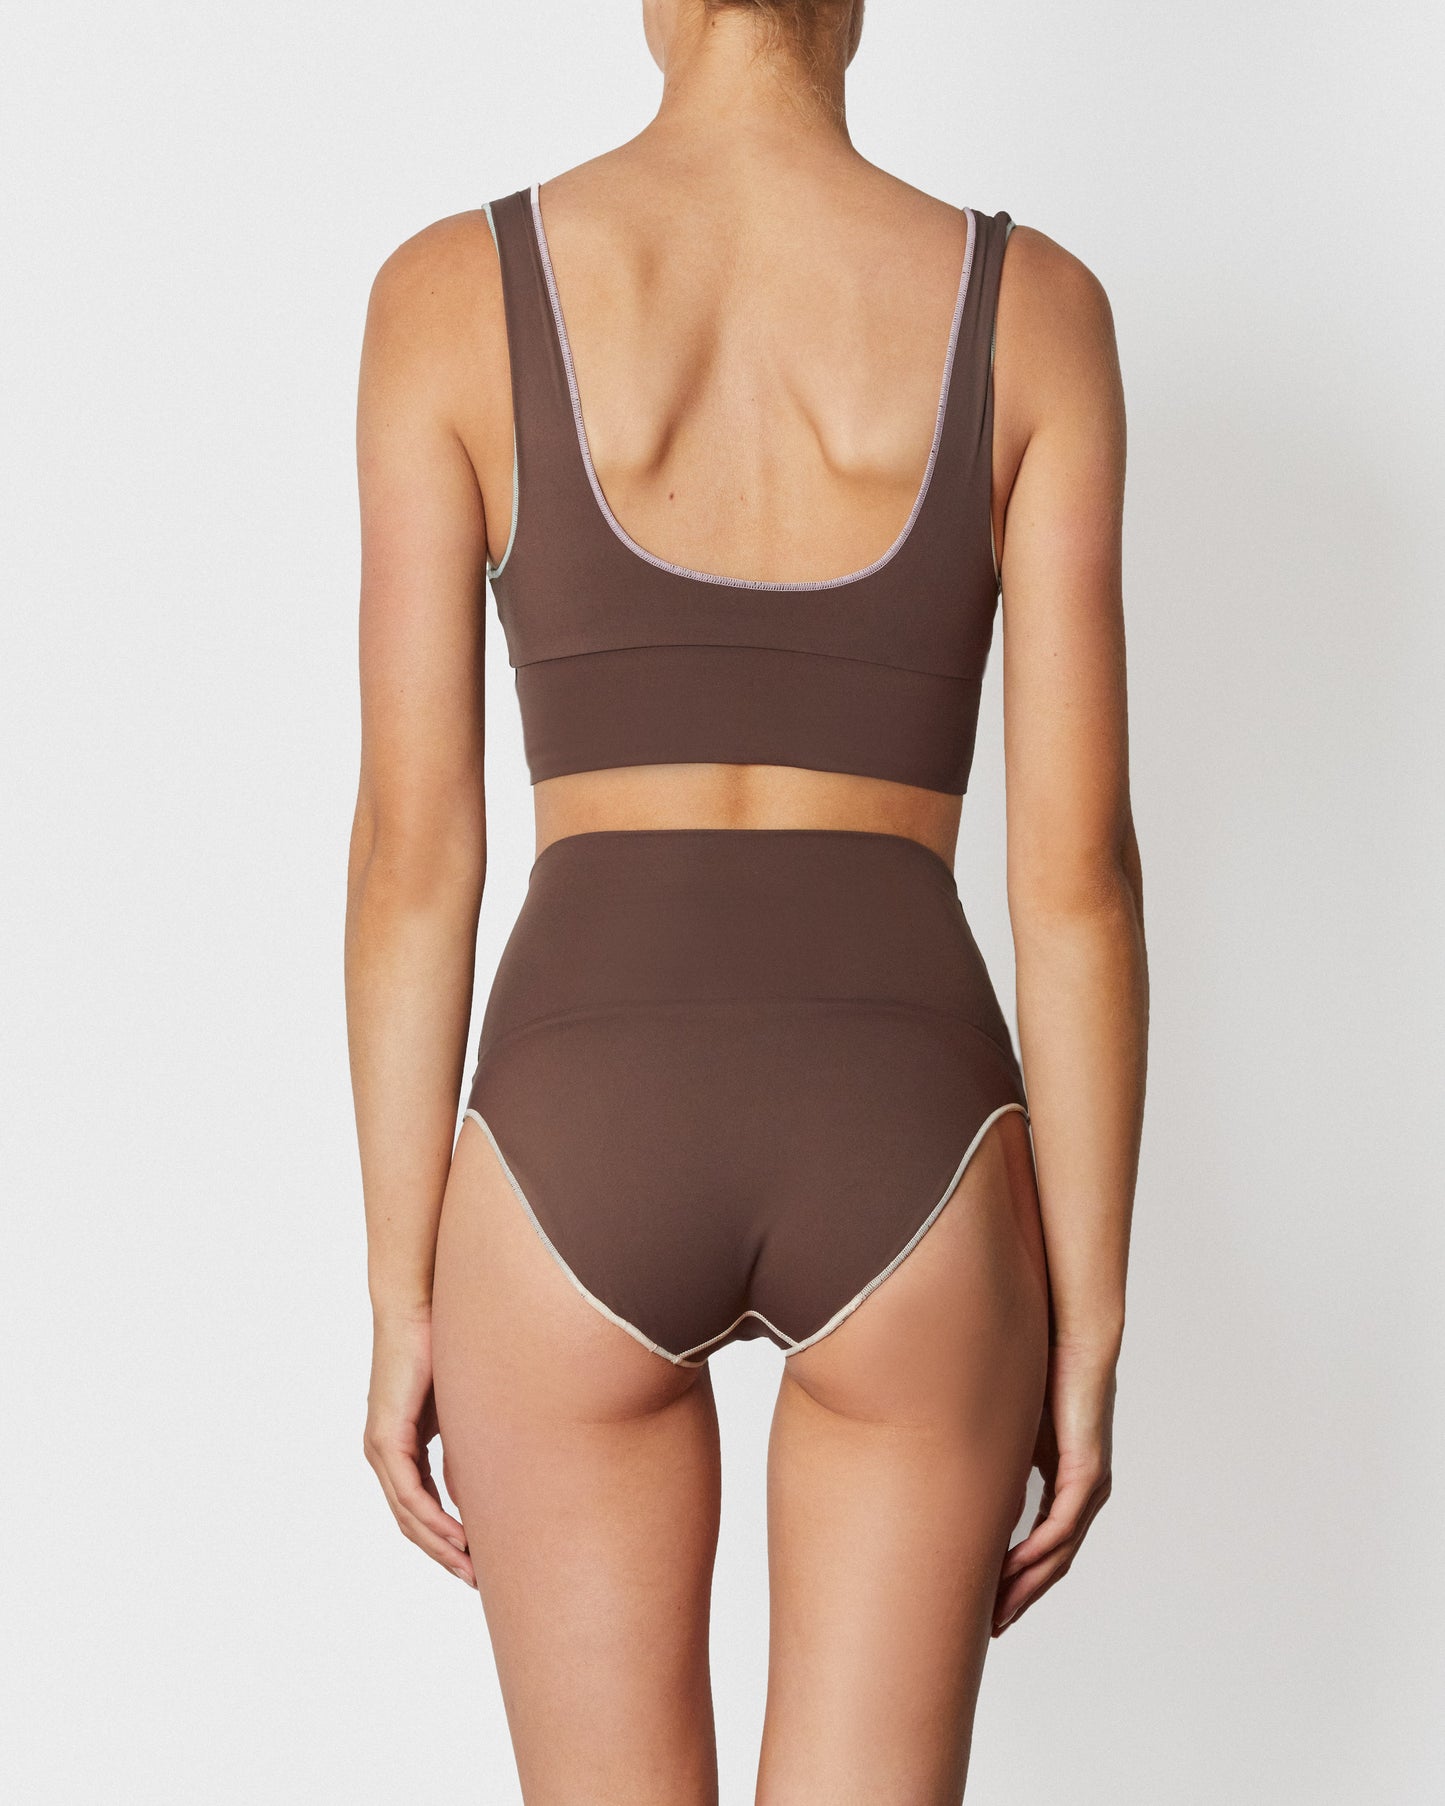 On body back of the Contour High Waist Pant - Fudgesicle